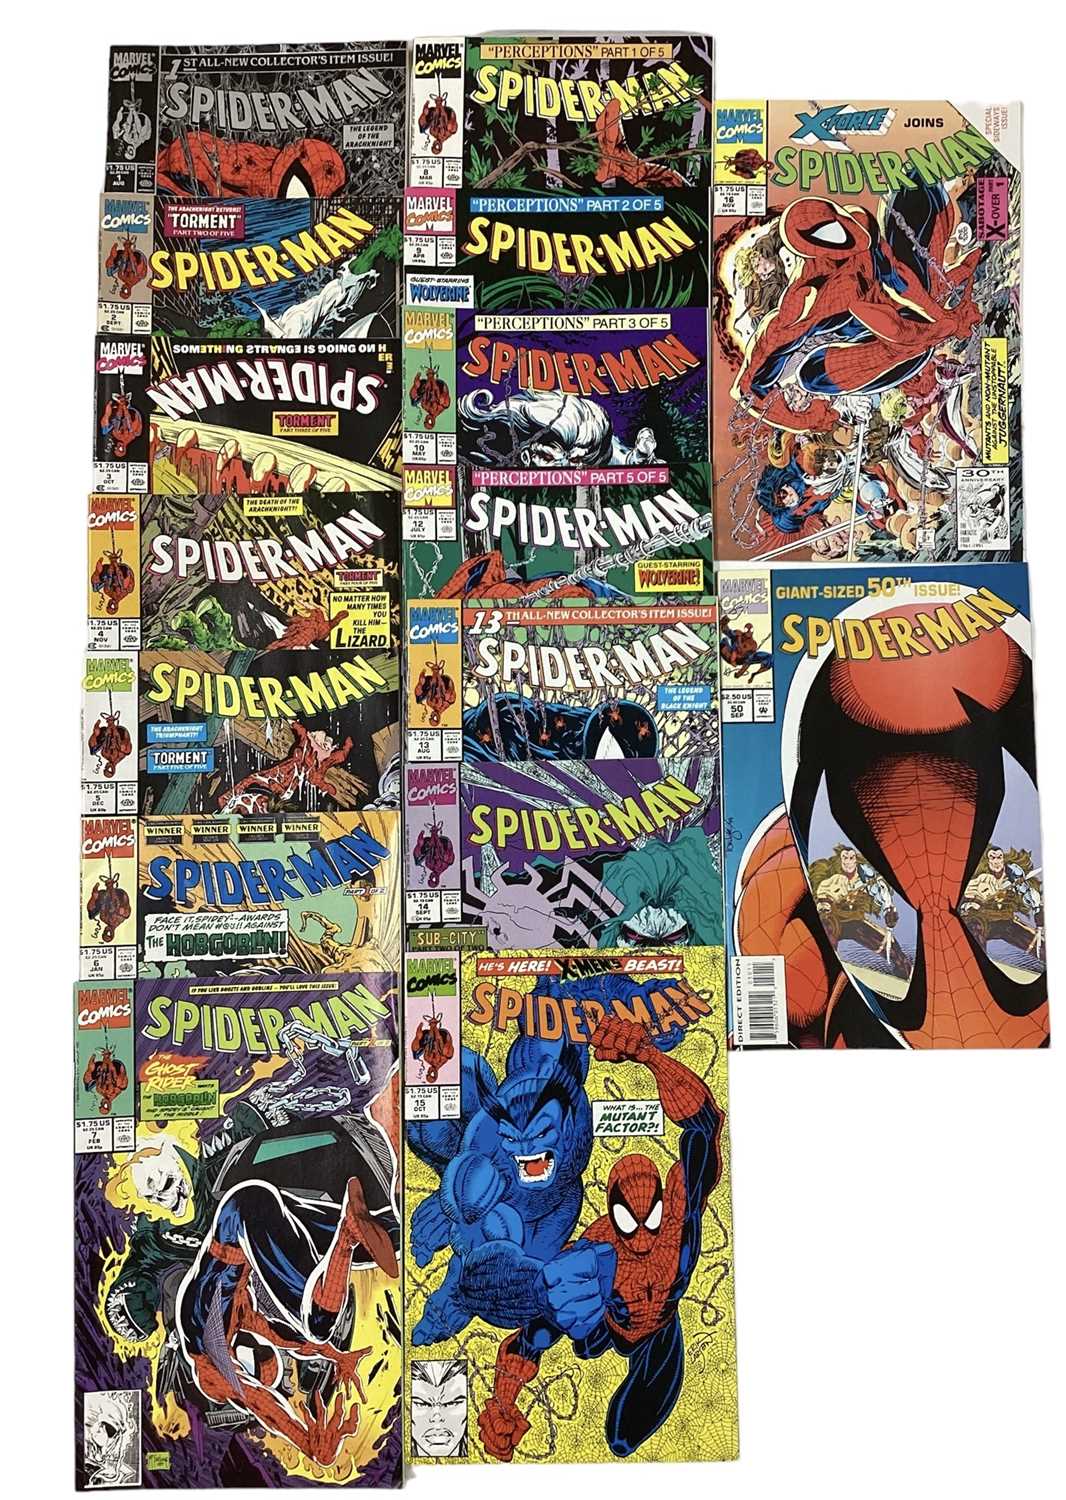 Lot 82 - Marvel Comics Spider-Man (1990 to 1994). To include issue 1, "tourment part 1". Also to include an incomplete run from issues 2 - 16, missing issue 11. Together with issue 50, "giant sized 50th iss...